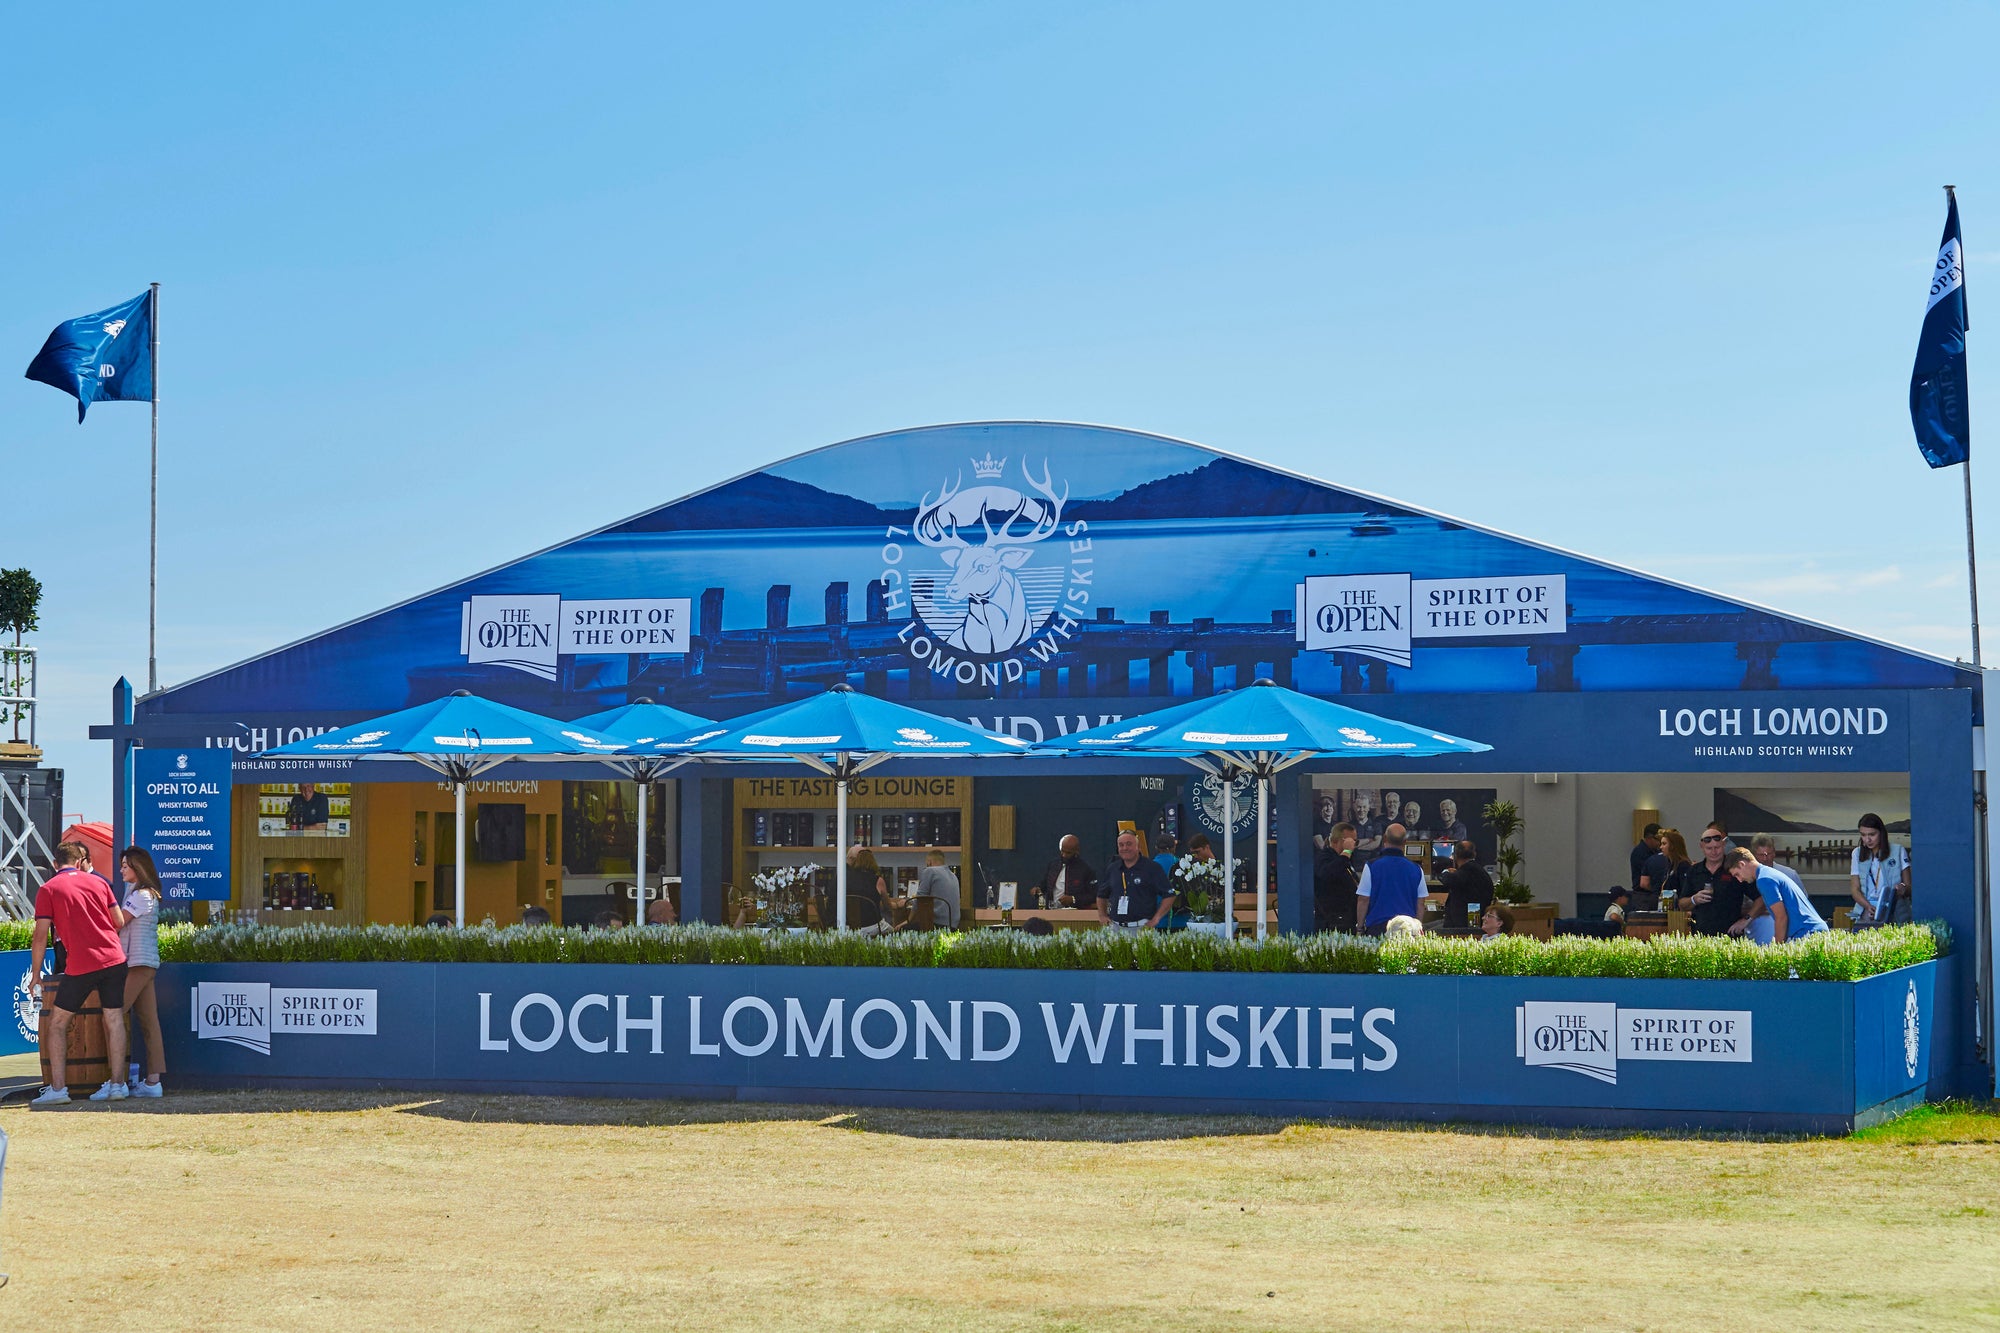 Loch Lomond Whiskies at the 147th Open at Carnoustie